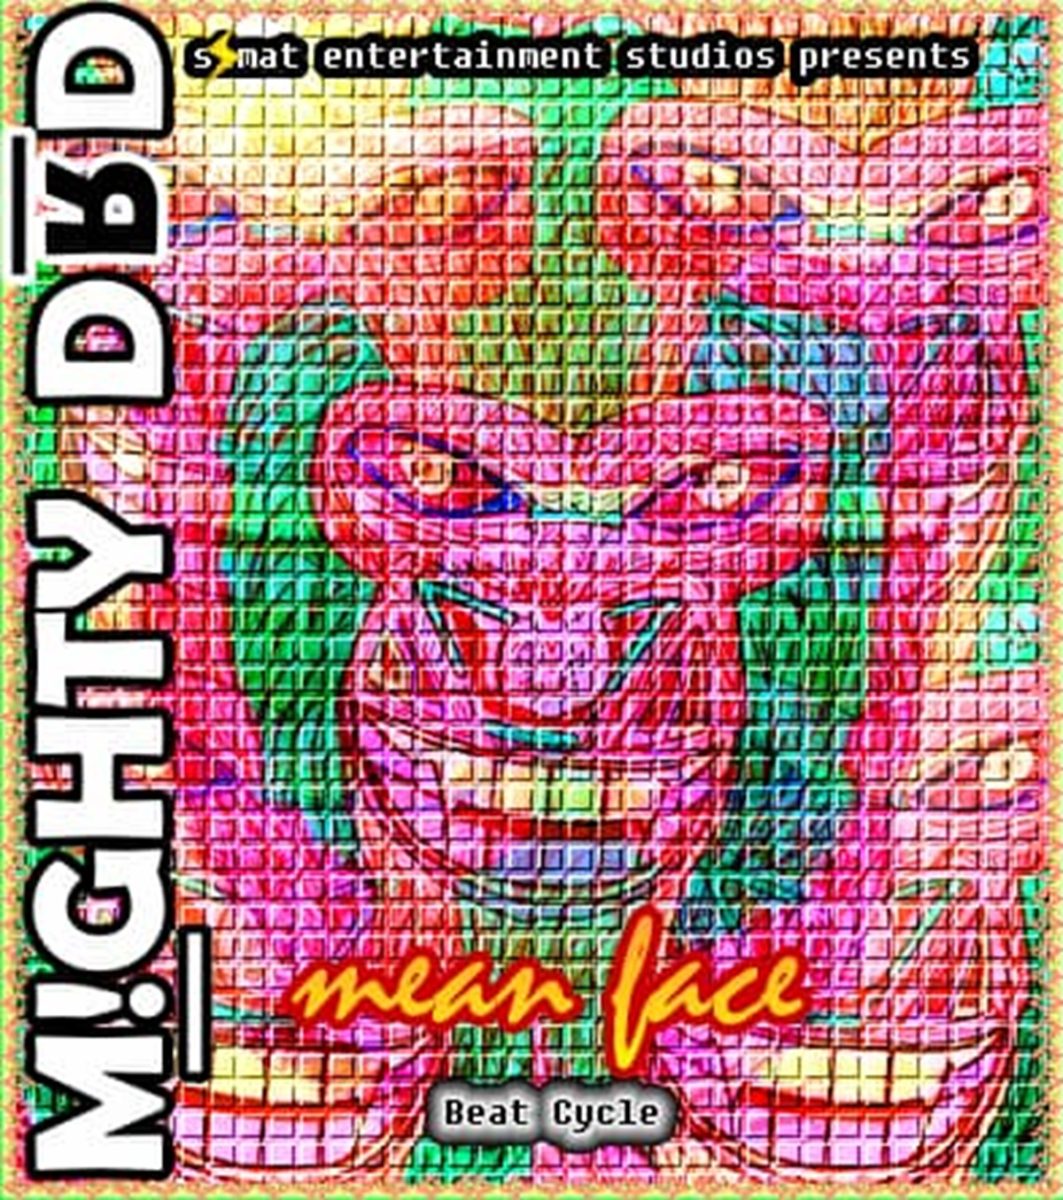 M!ghty DRD - Mean Face